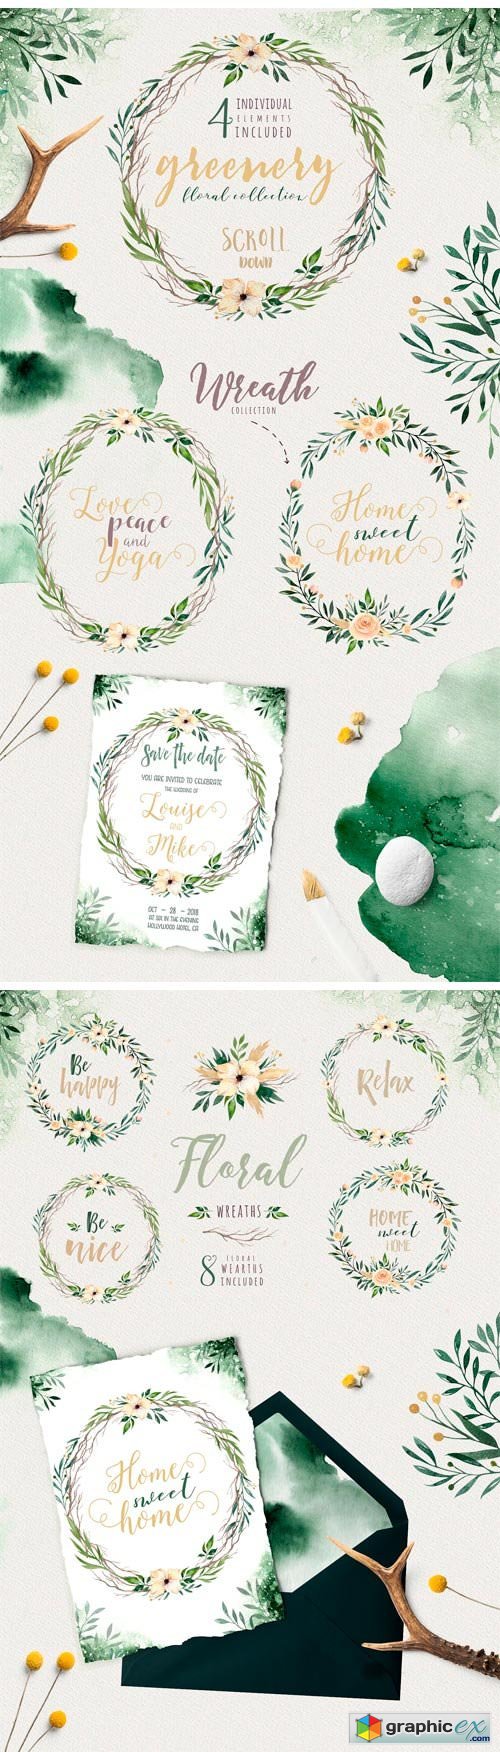 Greenery Watercolor Collection